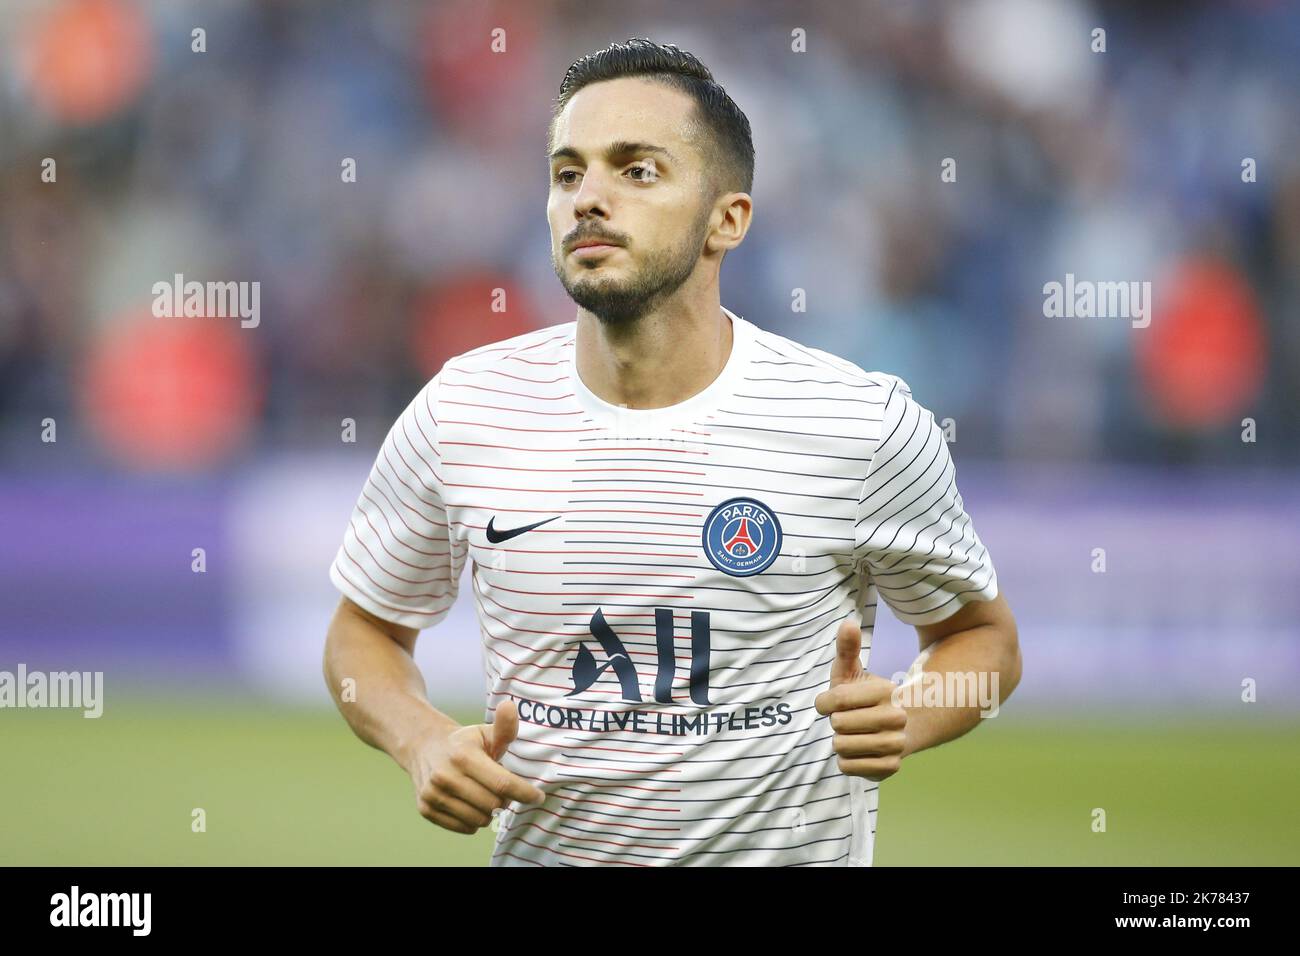 Pablo Sarabia of Paris Saint-Germain reacts during warmup before during the  French Ligue 1 match between Paris Saint-Germain ( PSG ) and Nîmes  olympique at Parc des Princes in Paris, France. 11.08.2019